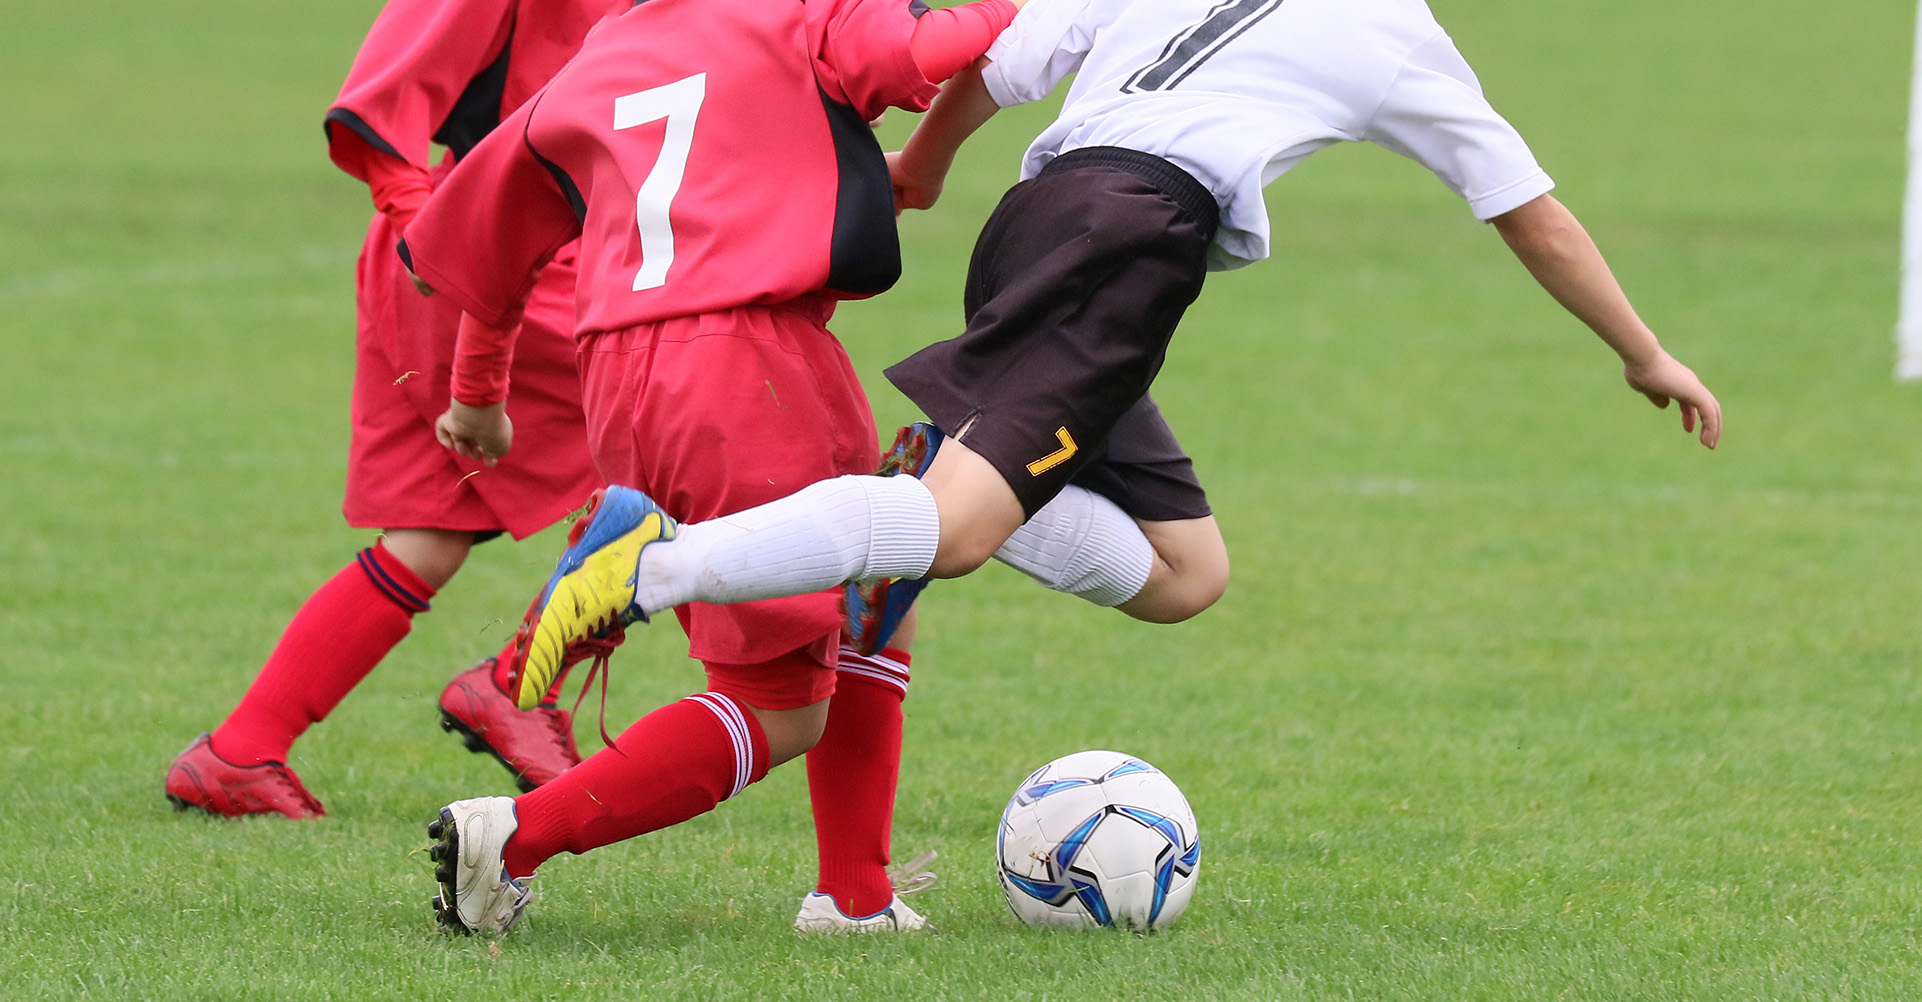 sports injury - Sporting Accidents, Tackles, Sport Injuries, Compensation